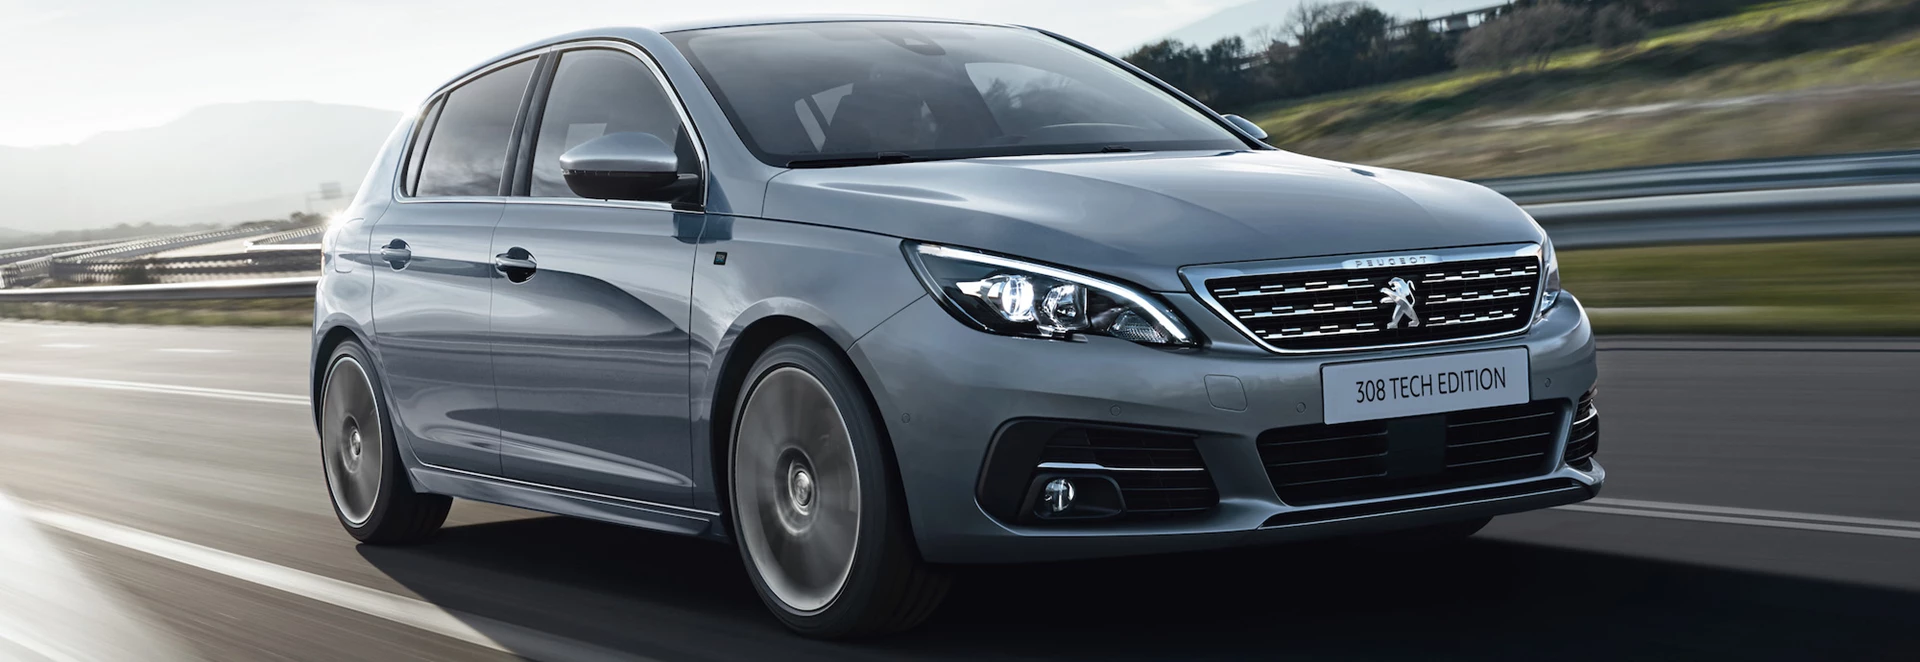 Tech Edition trim revealed for Peugeot 308